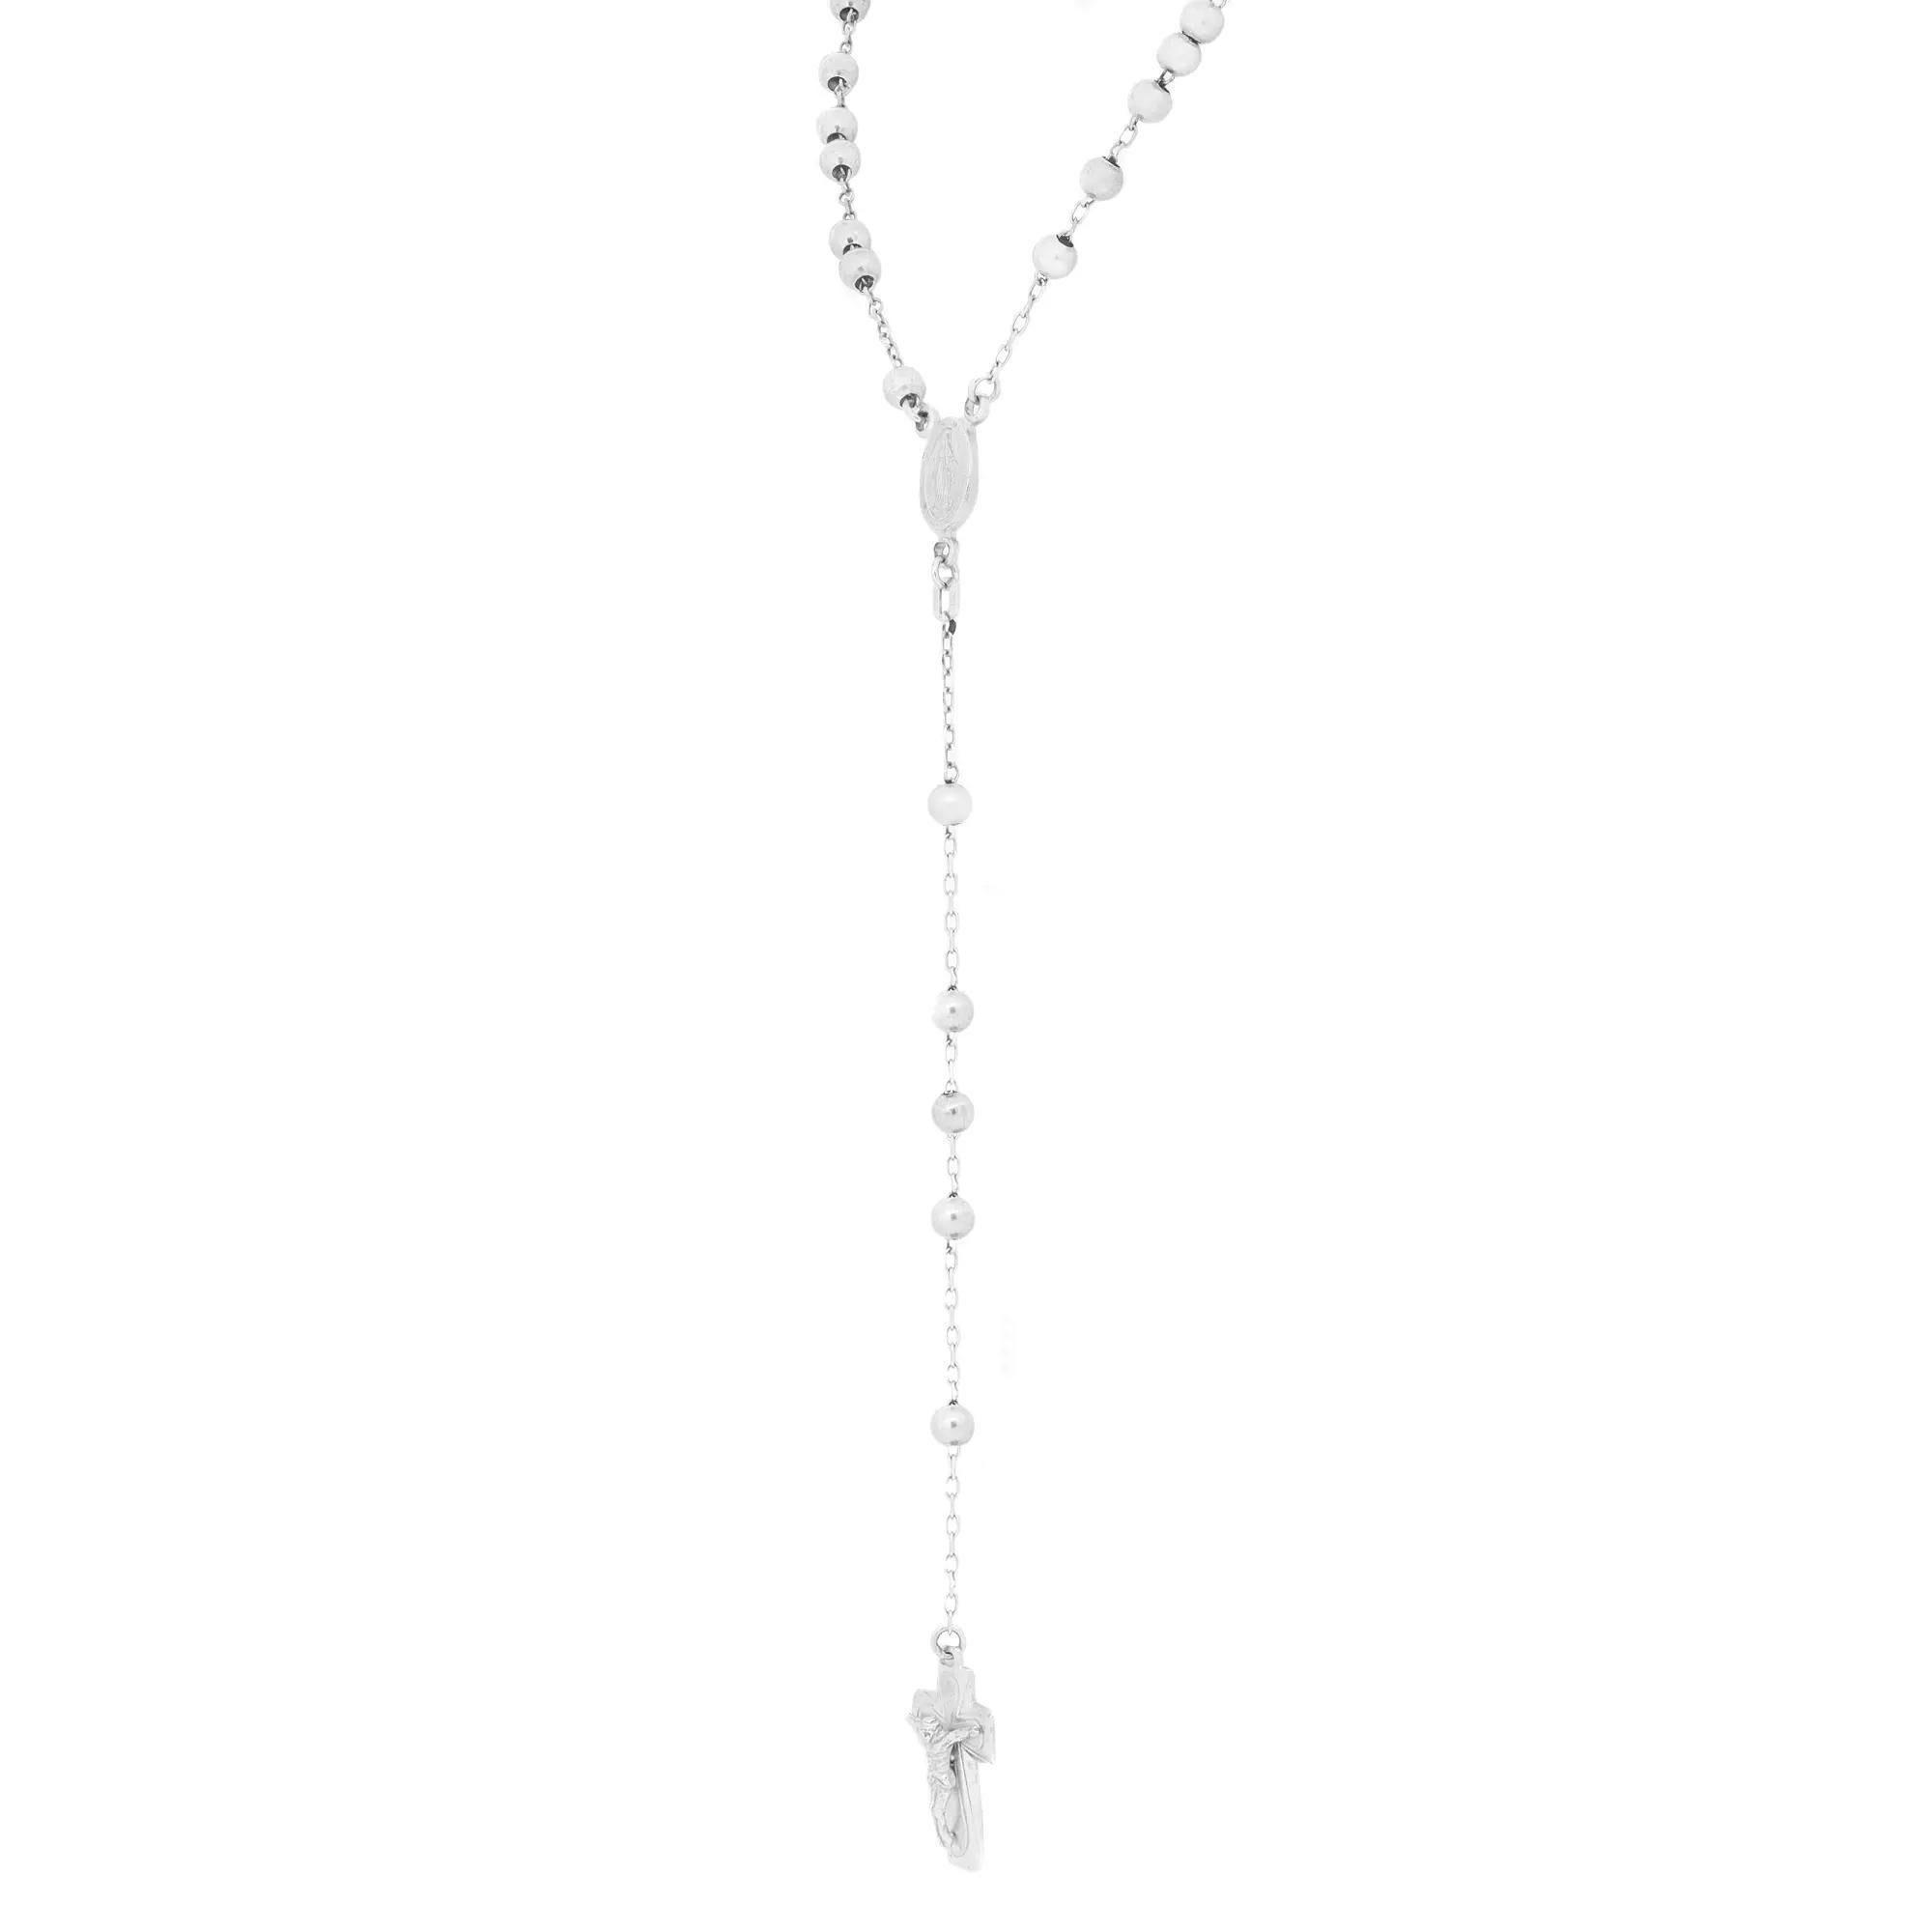 Rachel Koen Cross Rosary Lariat Necklace 14k White Gold In Excellent Condition For Sale In New York, NY